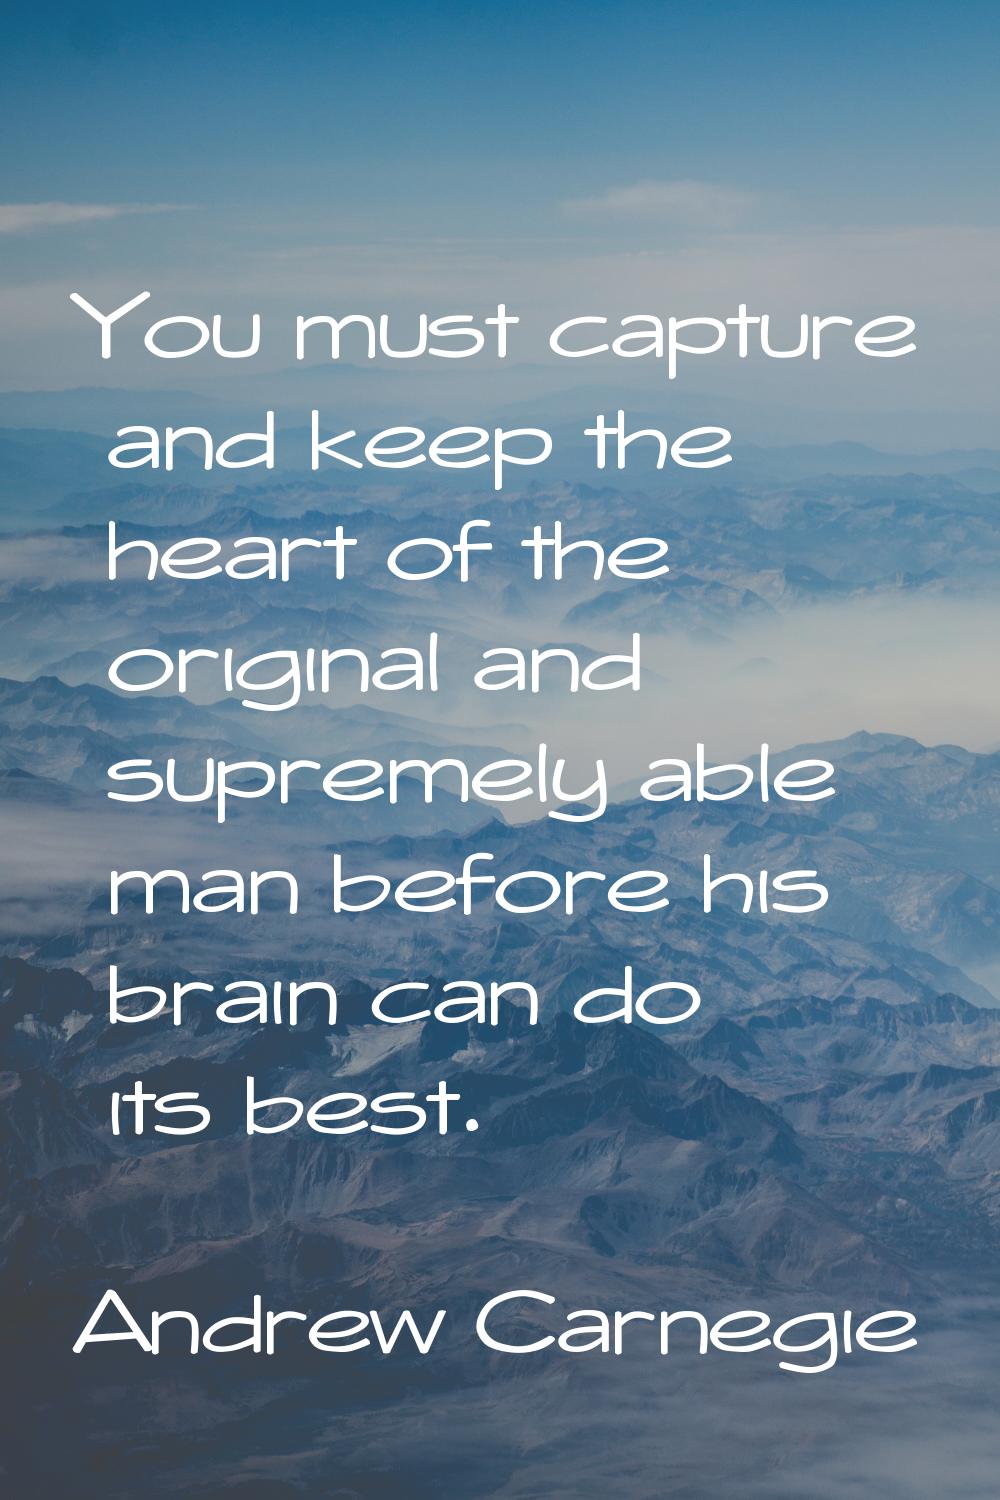 You must capture and keep the heart of the original and supremely able man before his brain can do 